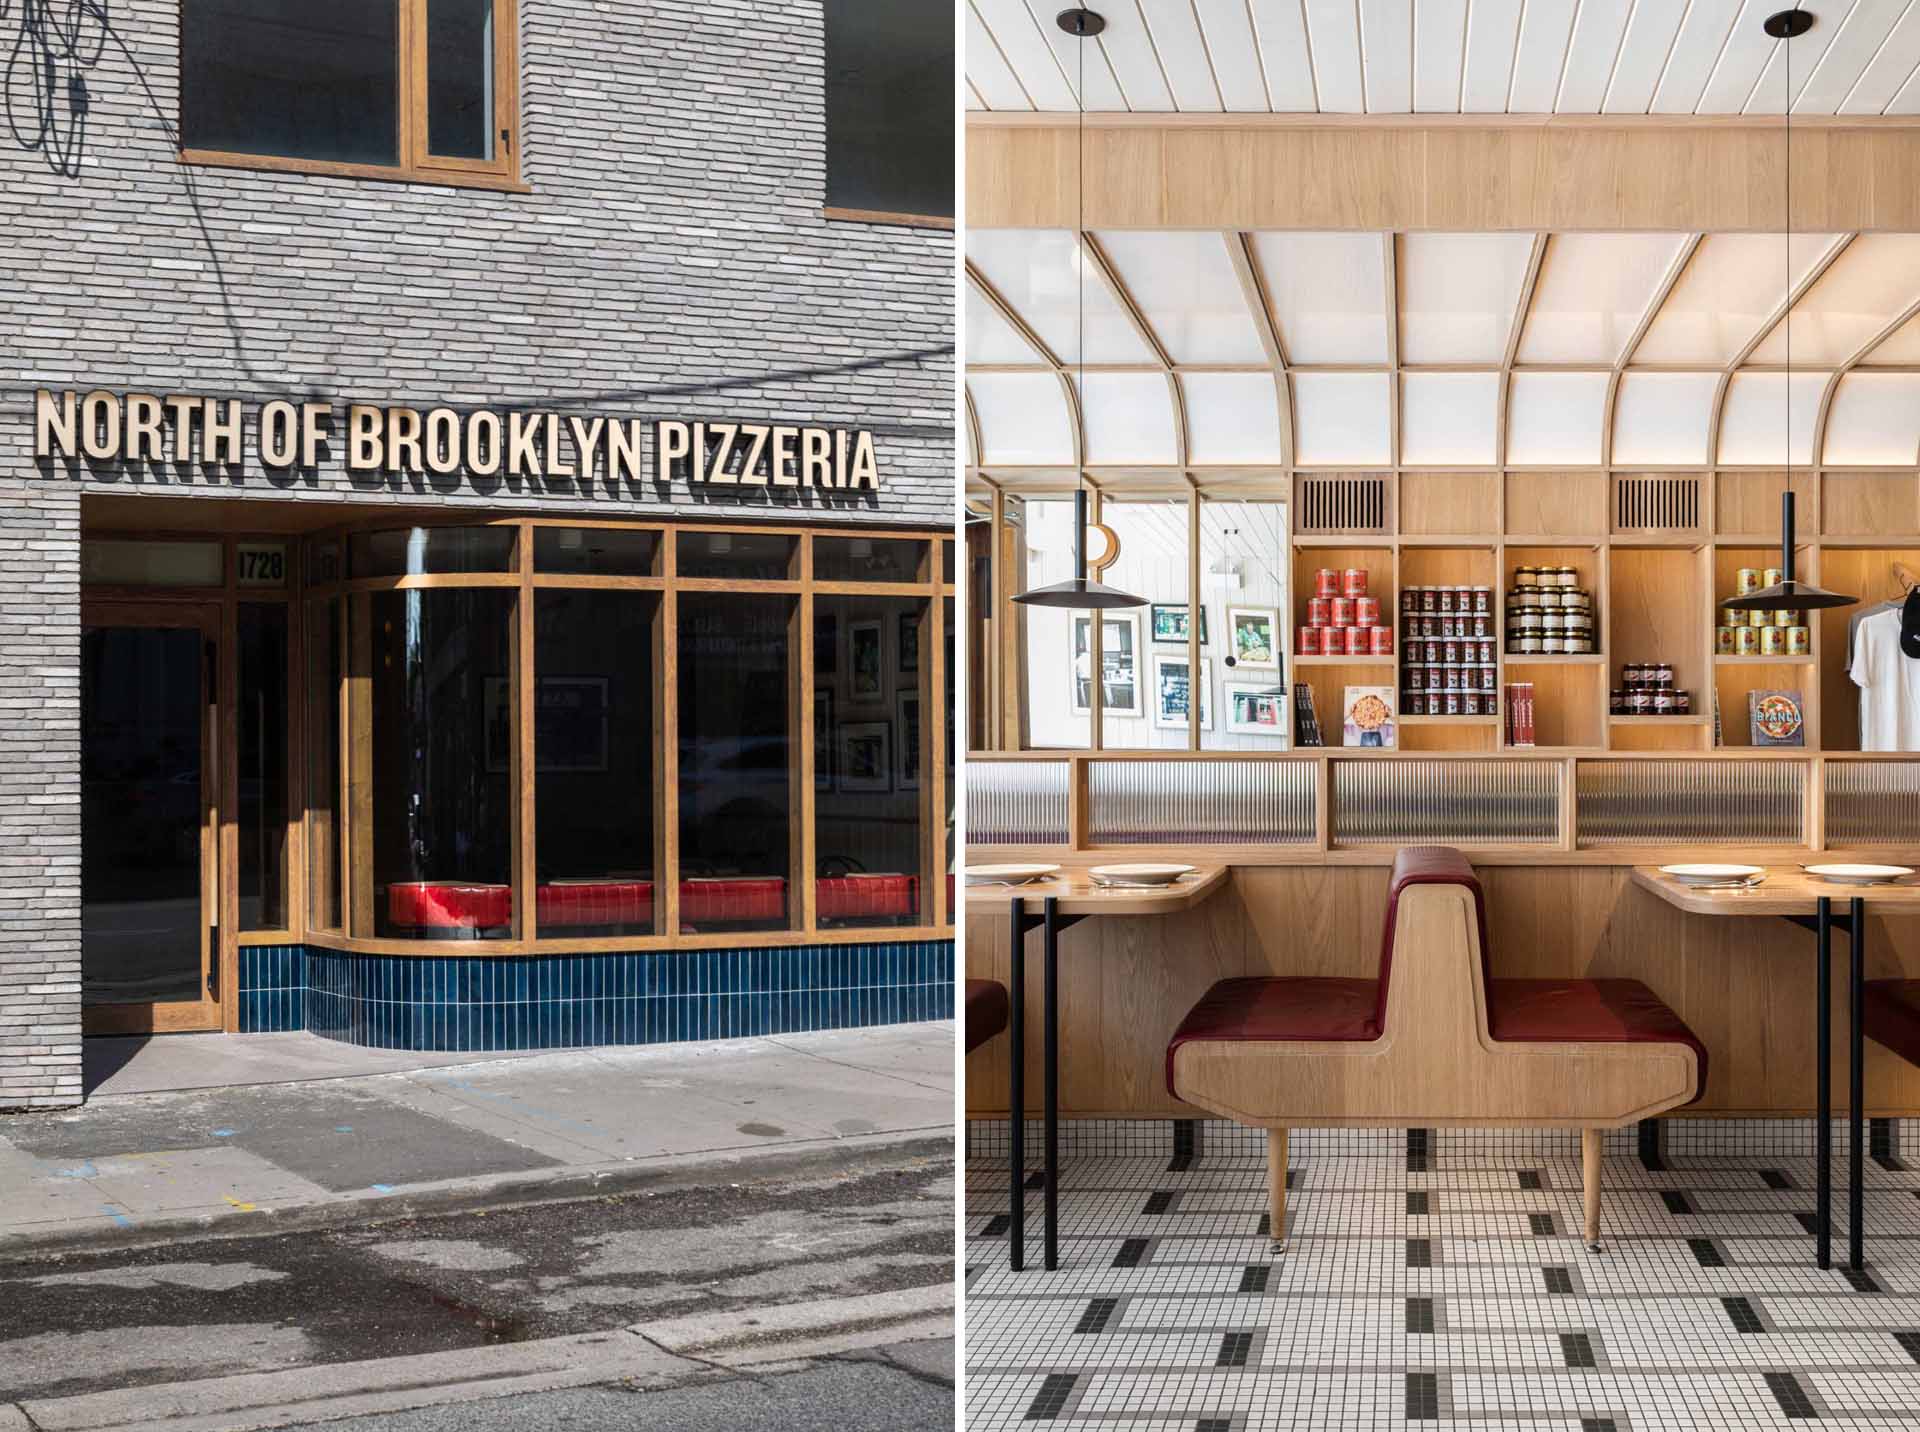 Architecture firm MRDK has recently completed North of Brooklyn Pizzeria in Toronto, Canada, that balances nostalgia and modernity.